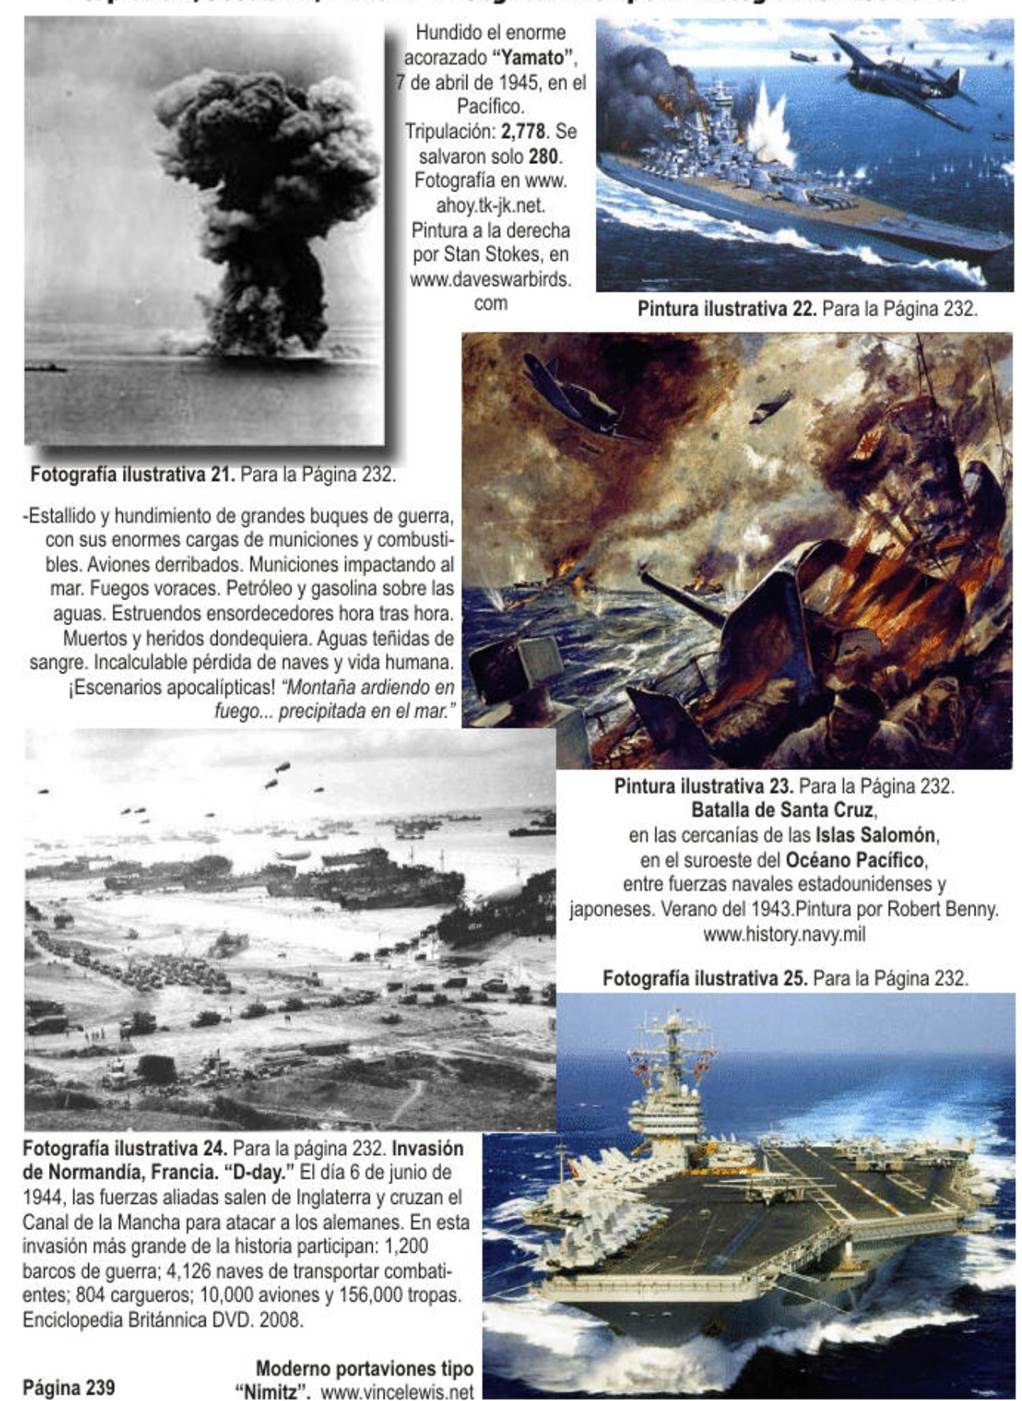 Group of photografts and paintings showing the massive destruction of ships and planes during the Second World War><br clear=